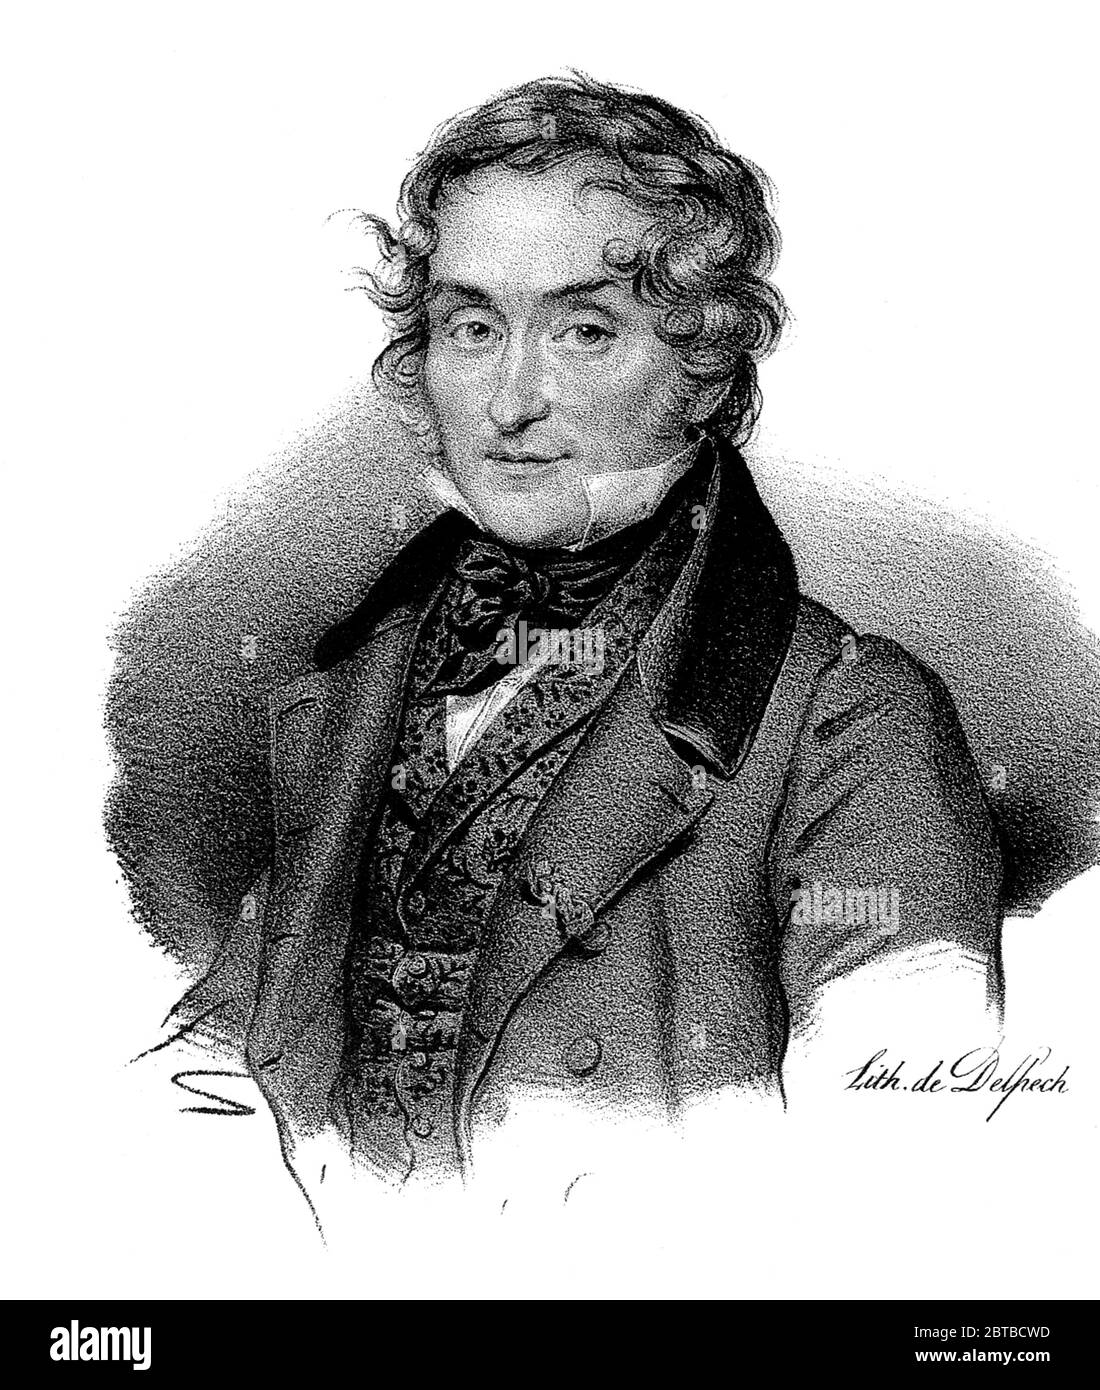 1833 , FRANCE : The french writer and librarian Jean CHARLES Emmanuel NODIER ( 1780 - 1844 ). Portrait engraved by Delpech , 1833 . Introduced a younger generation of Romanticists to the Conte Fantastique , Gothic literature and vampire tales . - ritratto - portrait - HISTORY - FOTO STORICHE - collar - colletto  - engraving - incisione - illustrazione - illustration  - SCRITTORE GOTICO  - LITERATURE - LETTERATURA GOTICA - GOTICO - HORROR - ROMANTIC - ROMANTICISMO ---  ARCHIVIO GBB Stock Photo